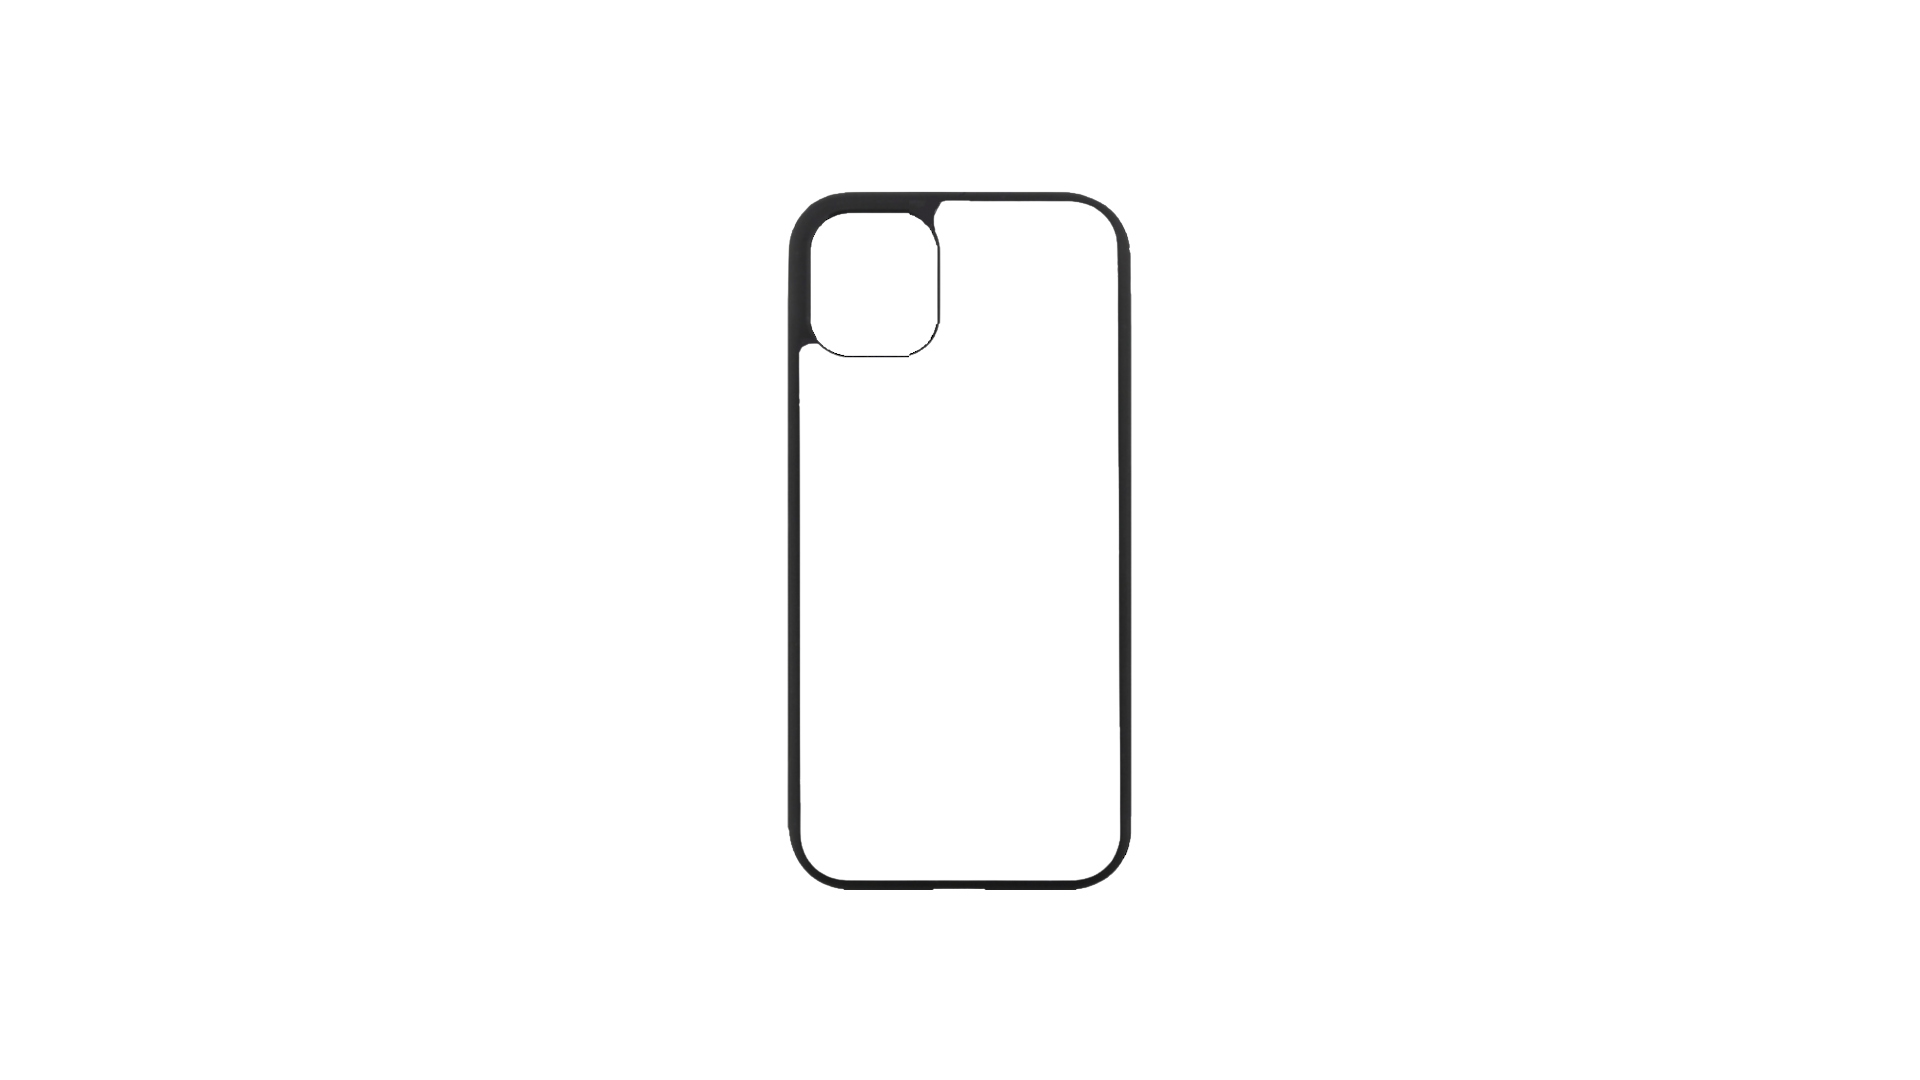 Coque personnalisable iPhone 11 Pro Max